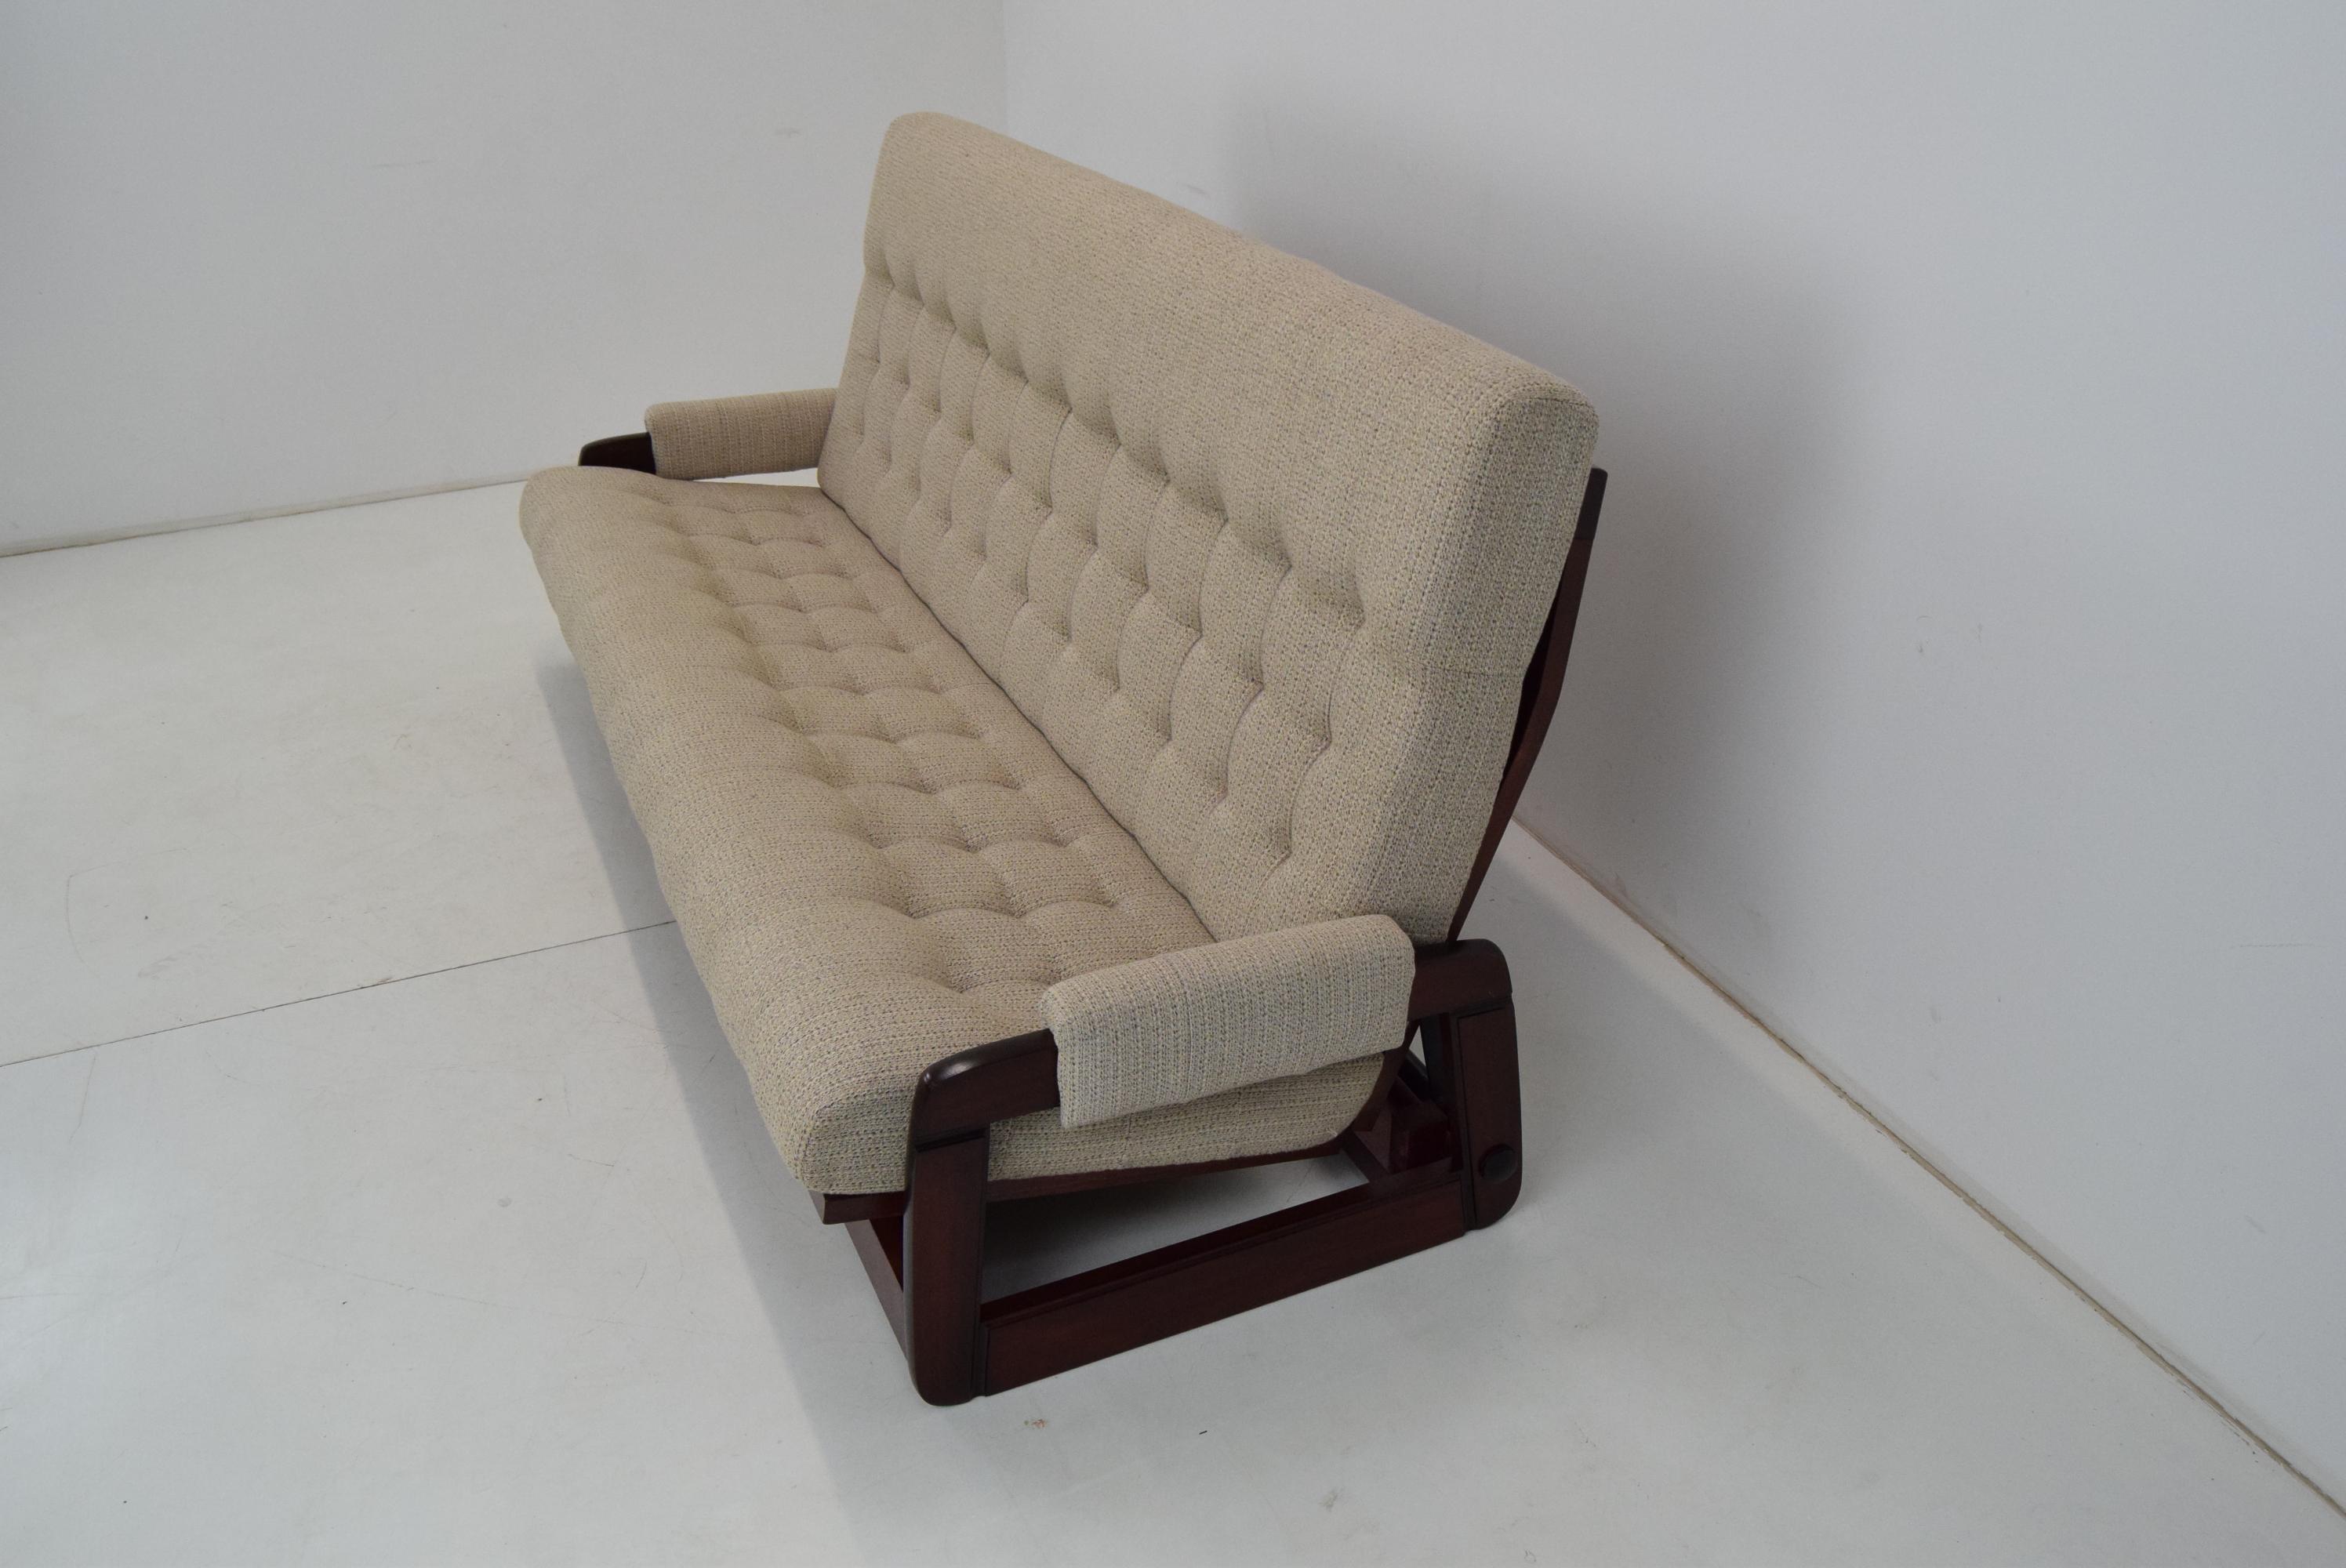 Made in Czechoslovakia
Made of Fabric,Wood,Metal
Daybed has dimensions:Height-33cm,Depth-206cm,Width-133cm
Seat height is 38cm
Good Original condition.
 